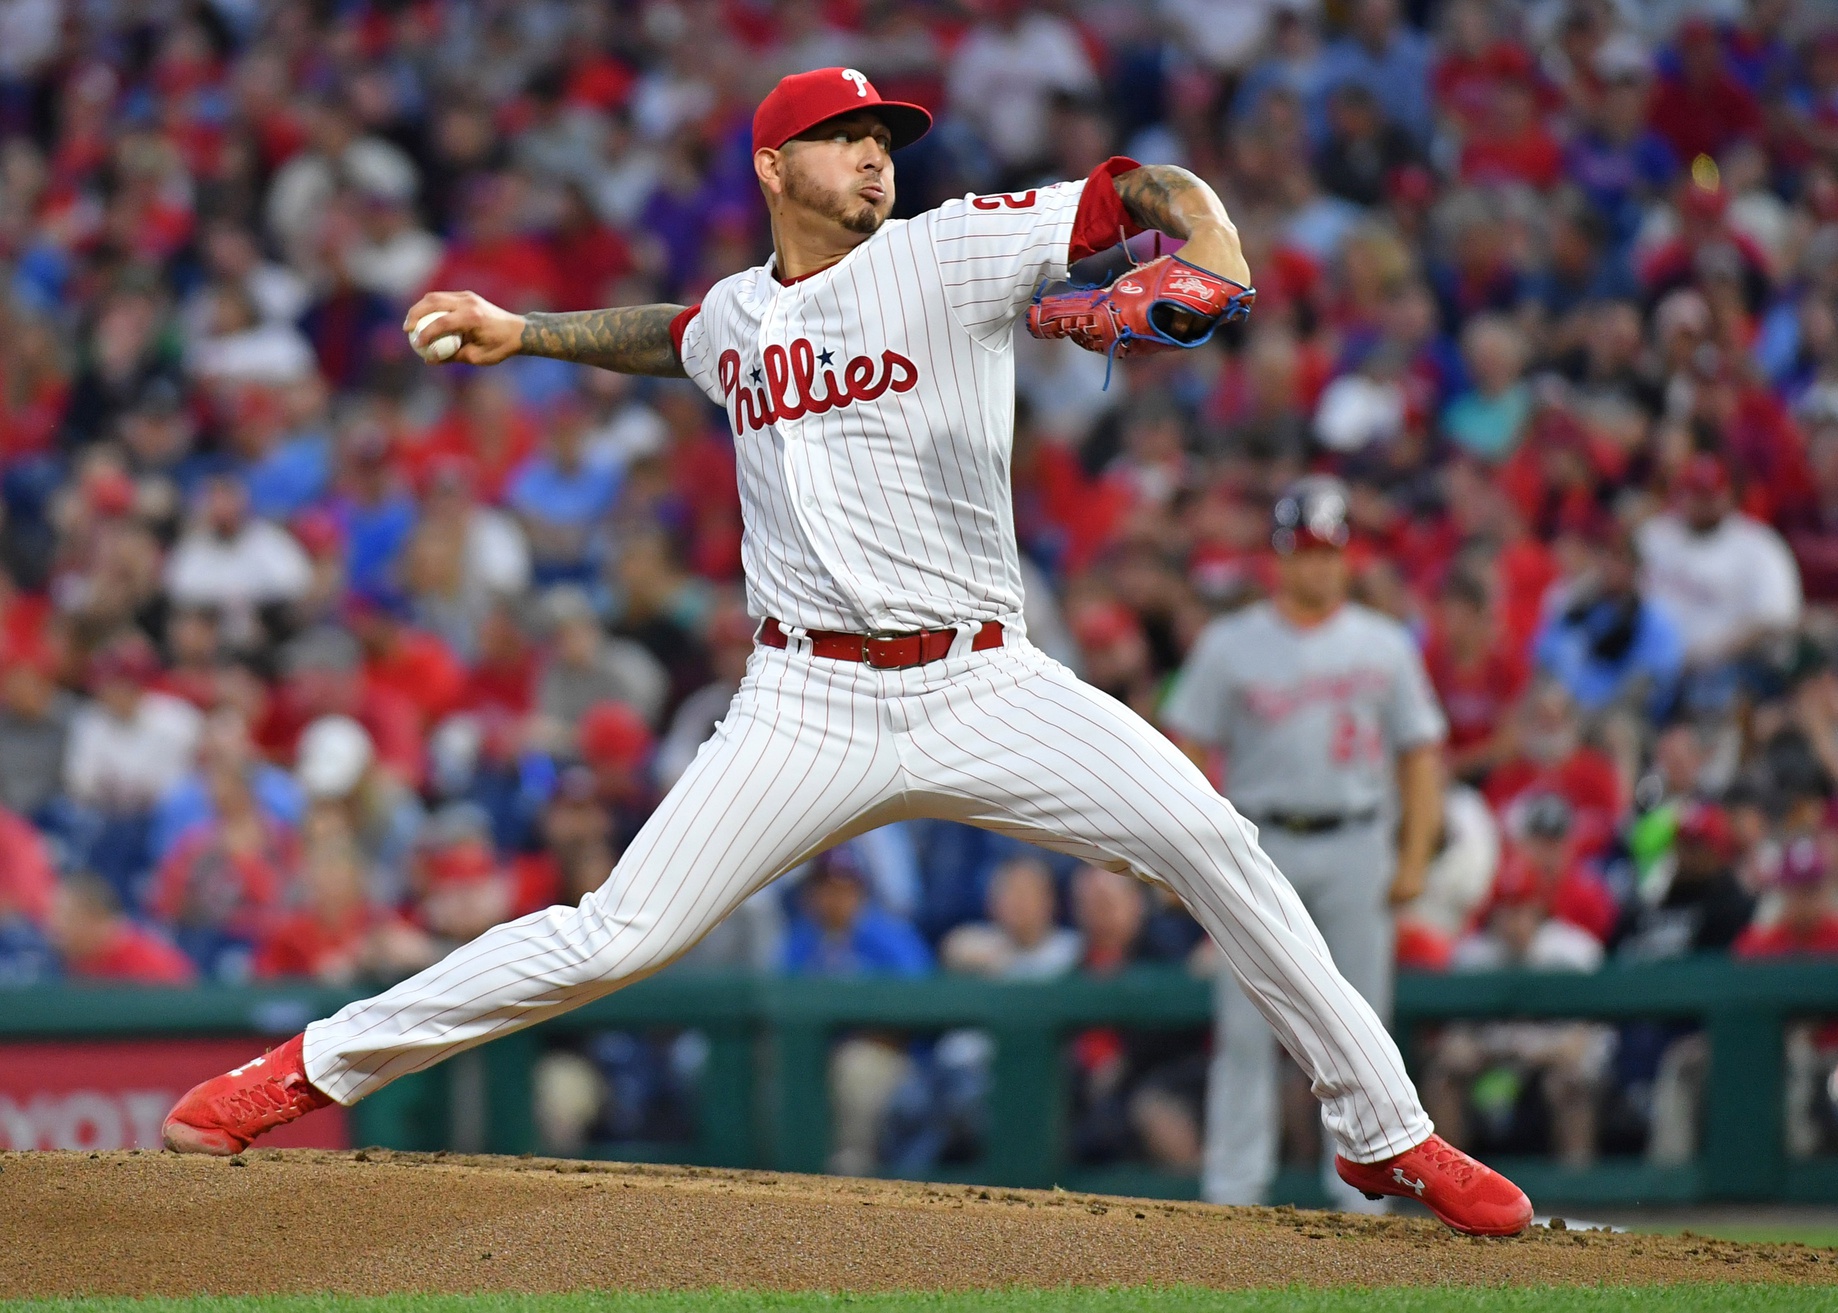 What Did We Learn From Vince Velasquez’s First Start?